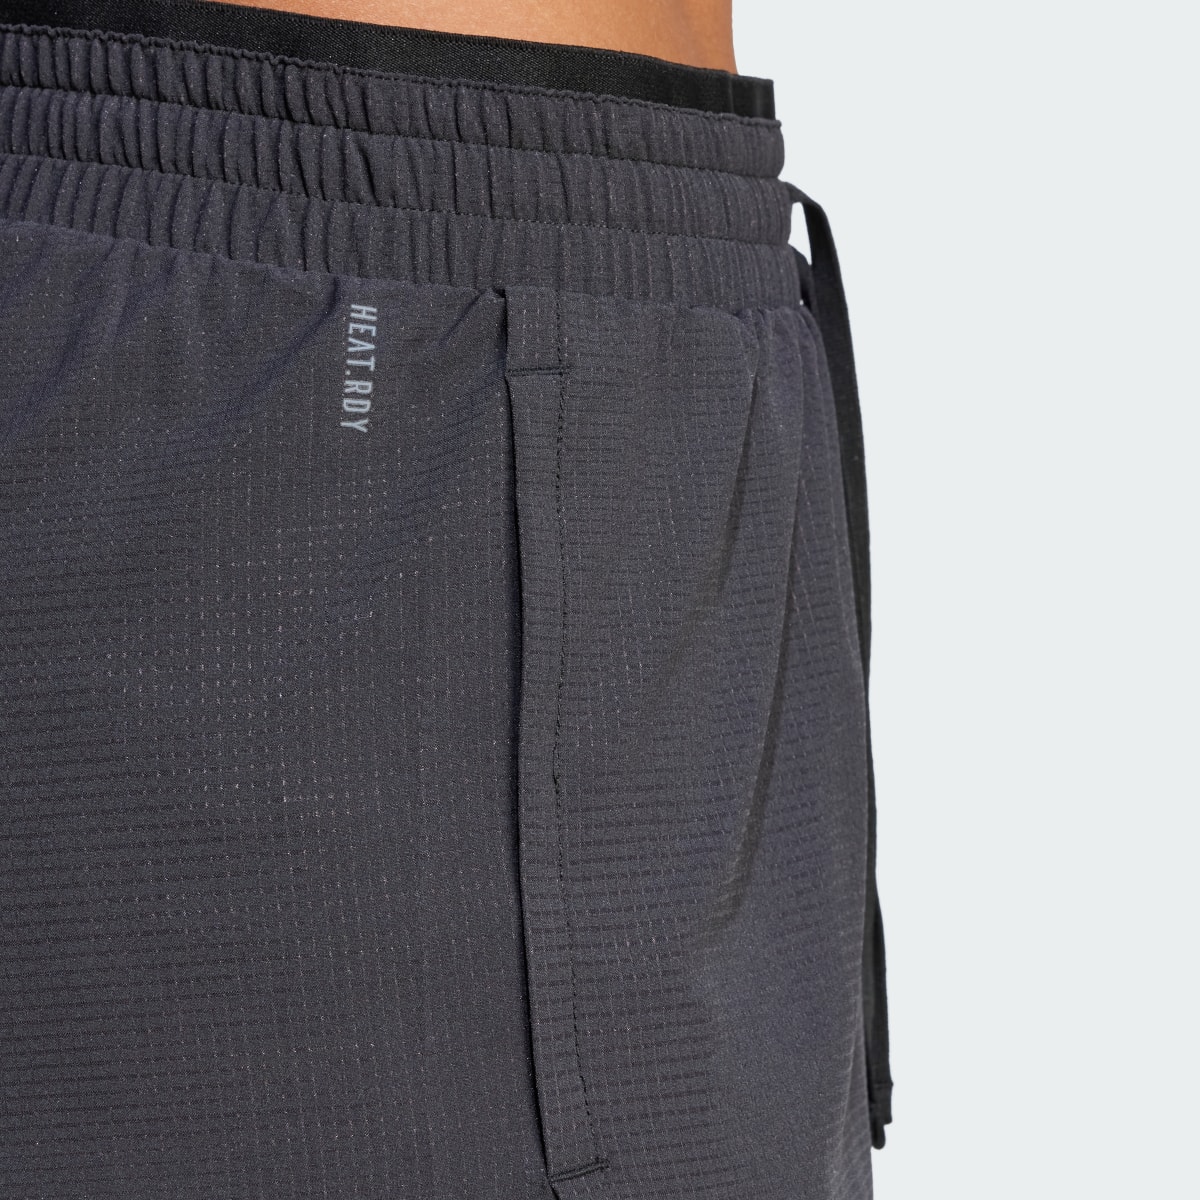 Adidas HIIT HEAT.RDY Two-in-One Shorts. 7